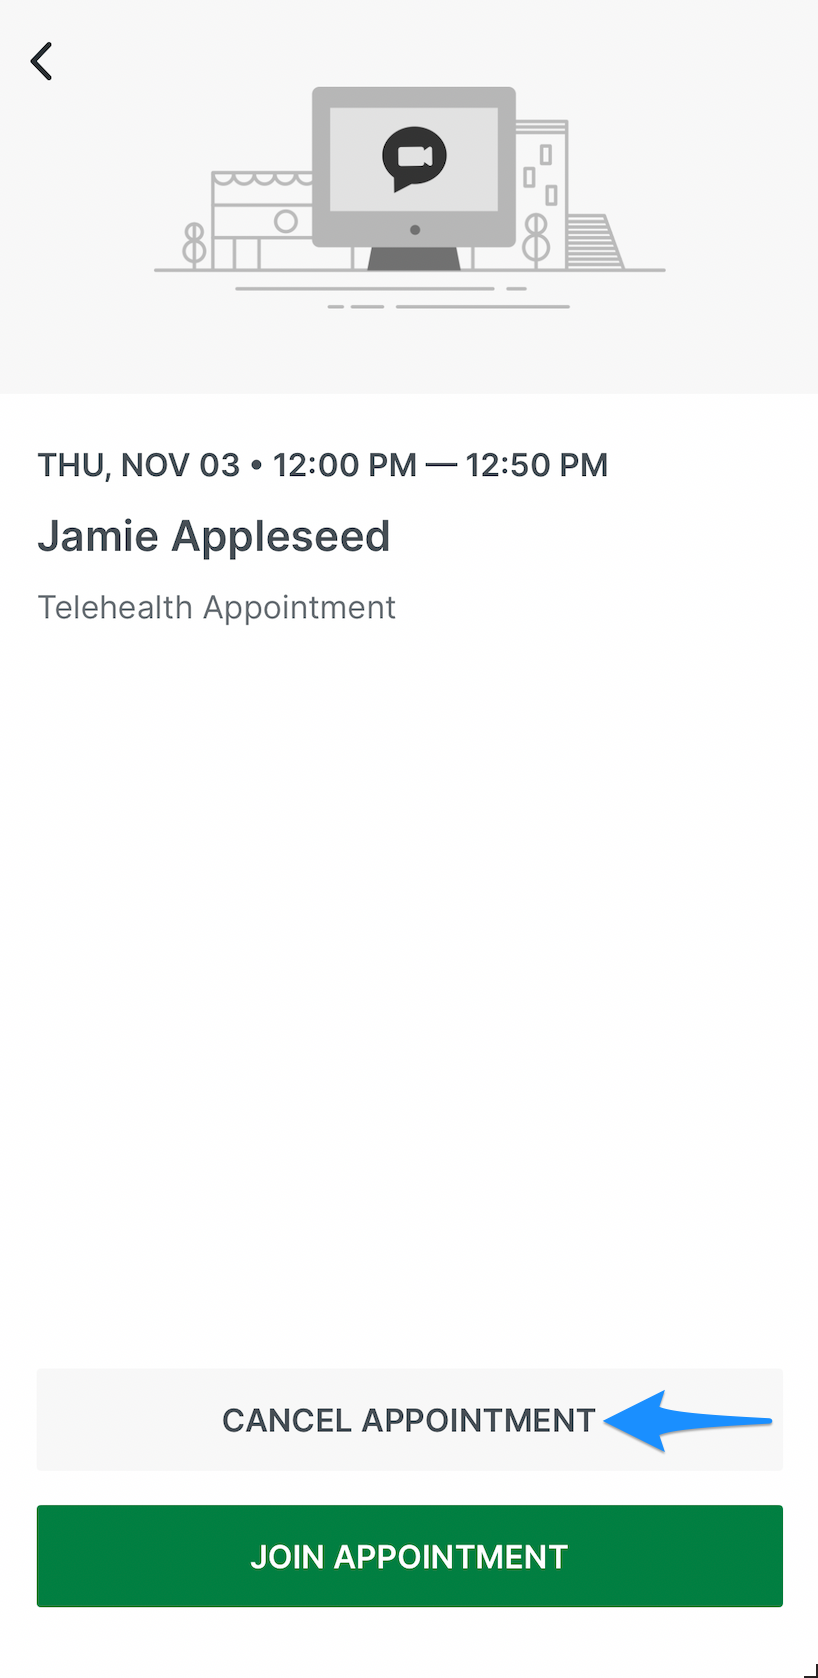 cancelappointment.simplepracticeclientportalapp.appointmentdetails.png